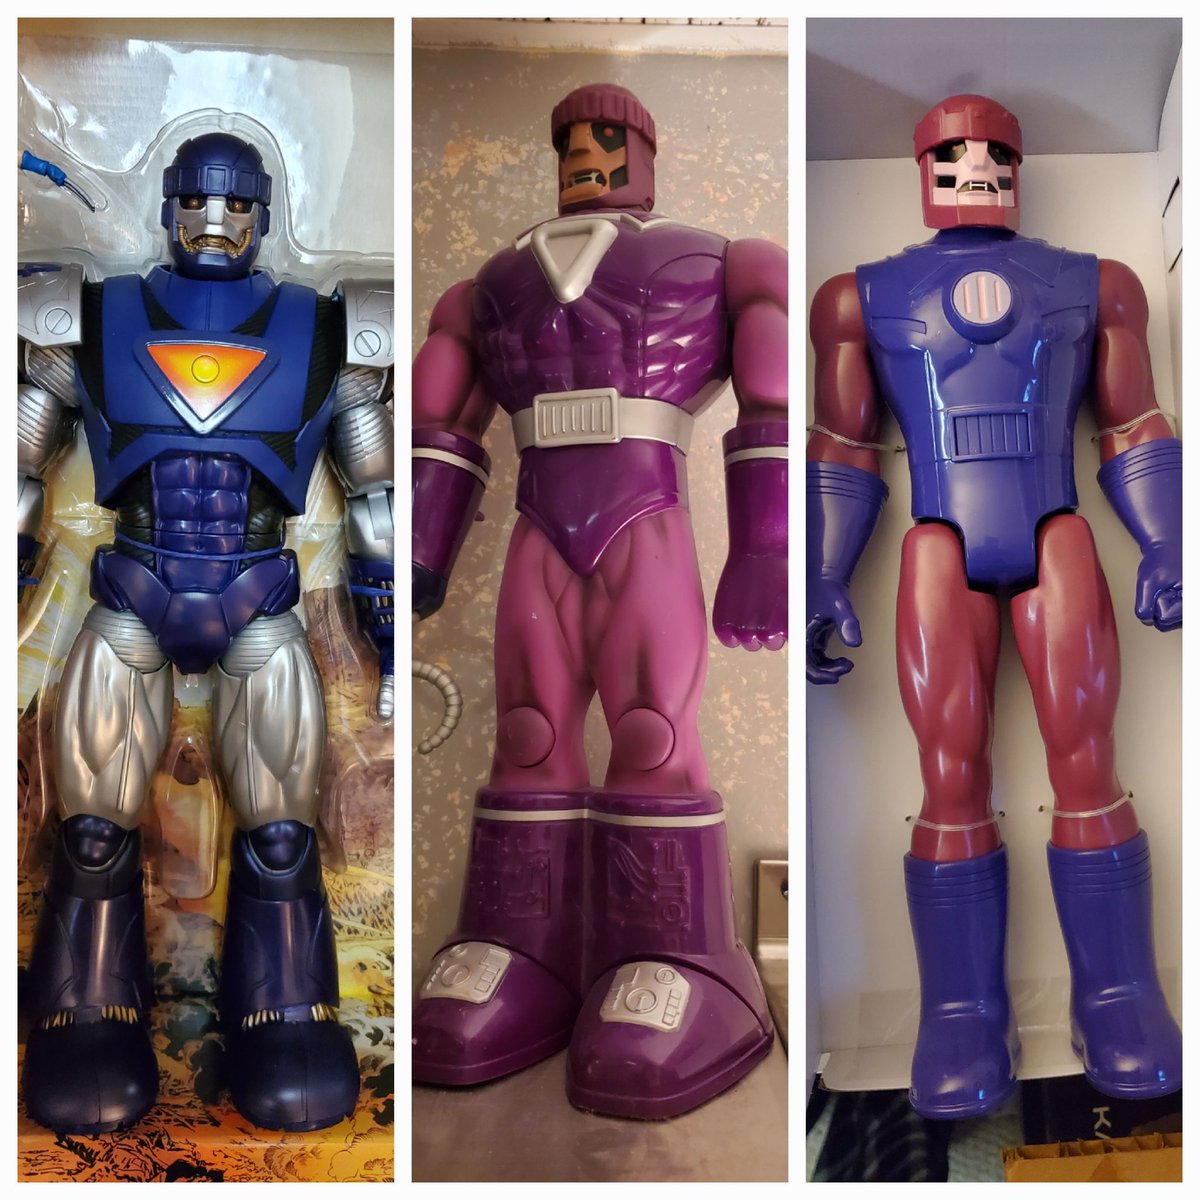 Which should I paint next?

I'm working on a series of Robot Toy Oil Paintings. 

#toy #oilpainting #art #artist #xmen #robottoy #toyrobot